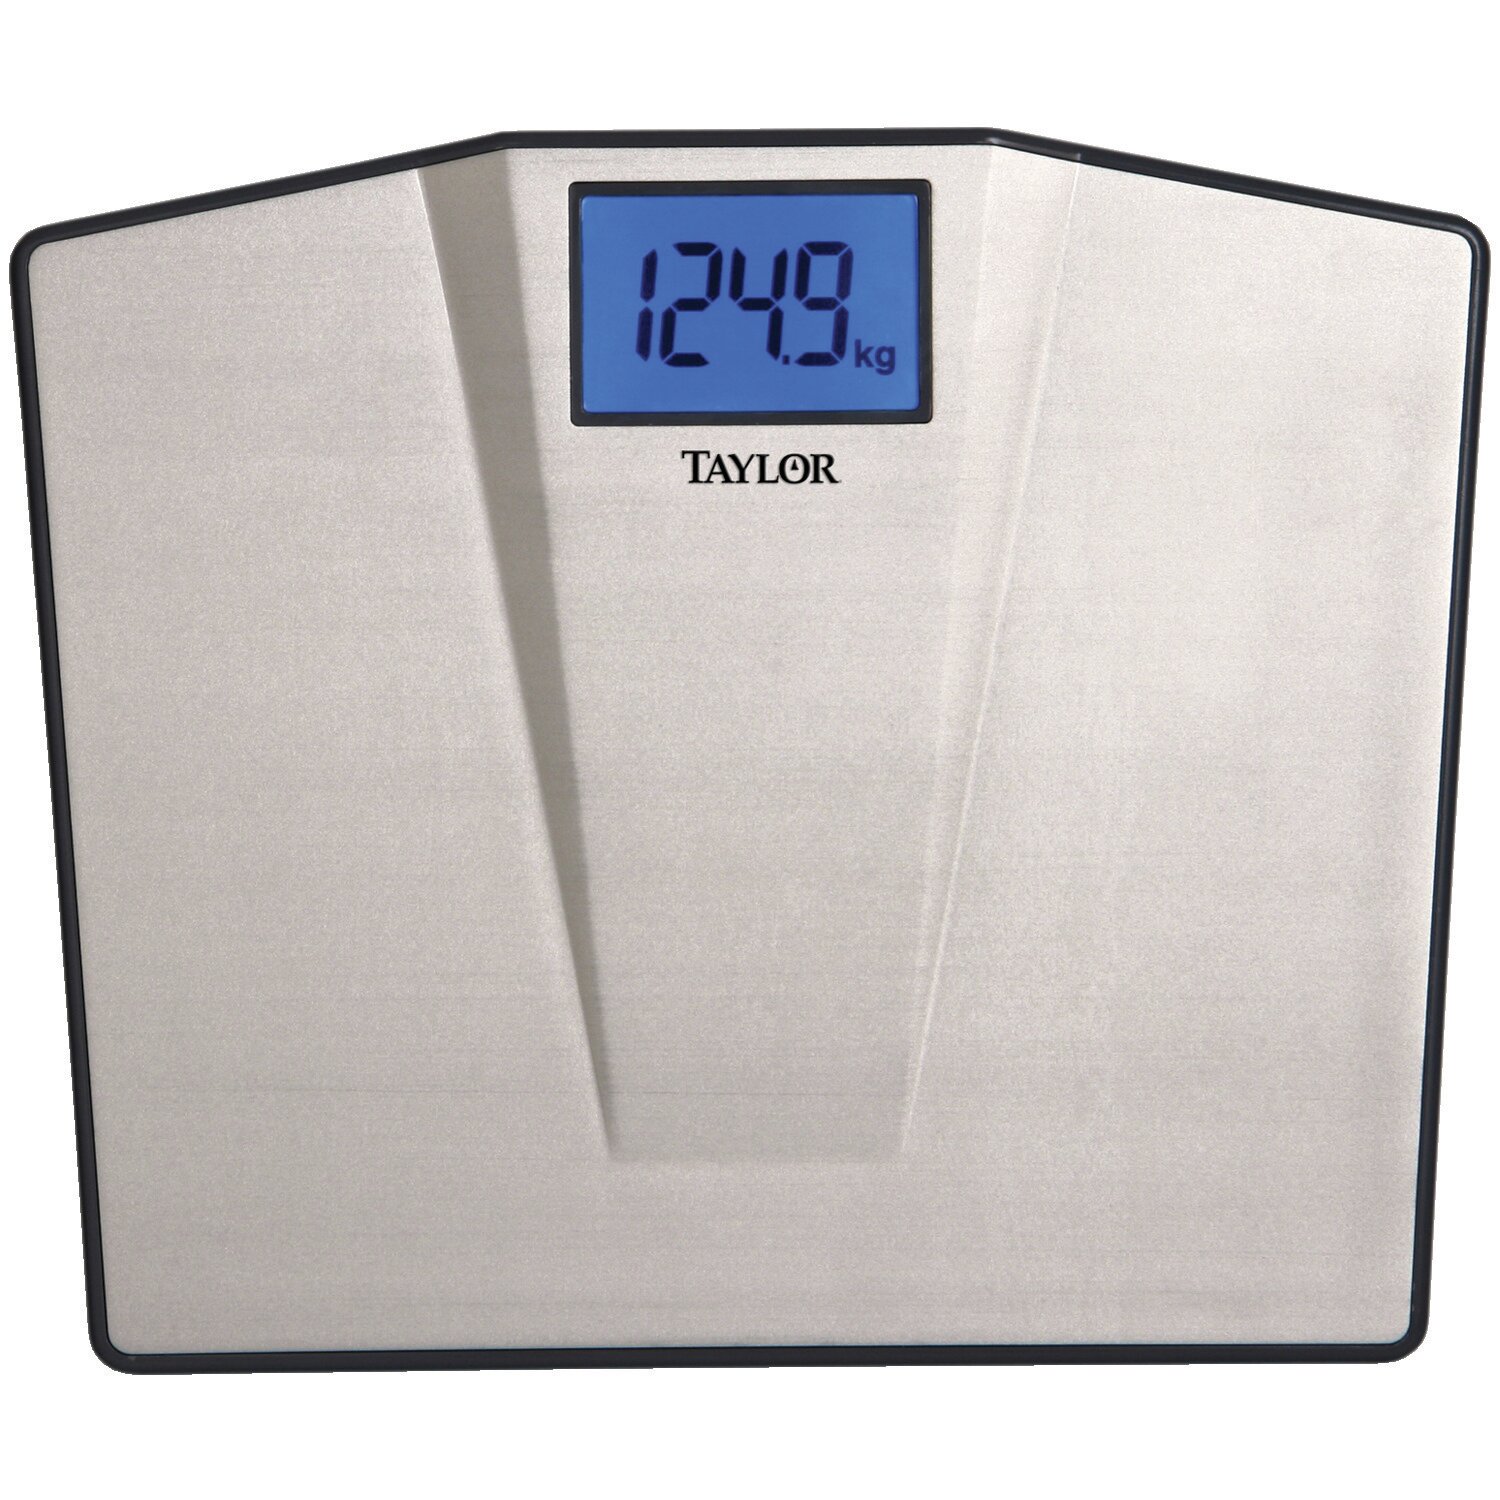 Taylor Digital Bath Scale with Carry Handle and Large Platform 